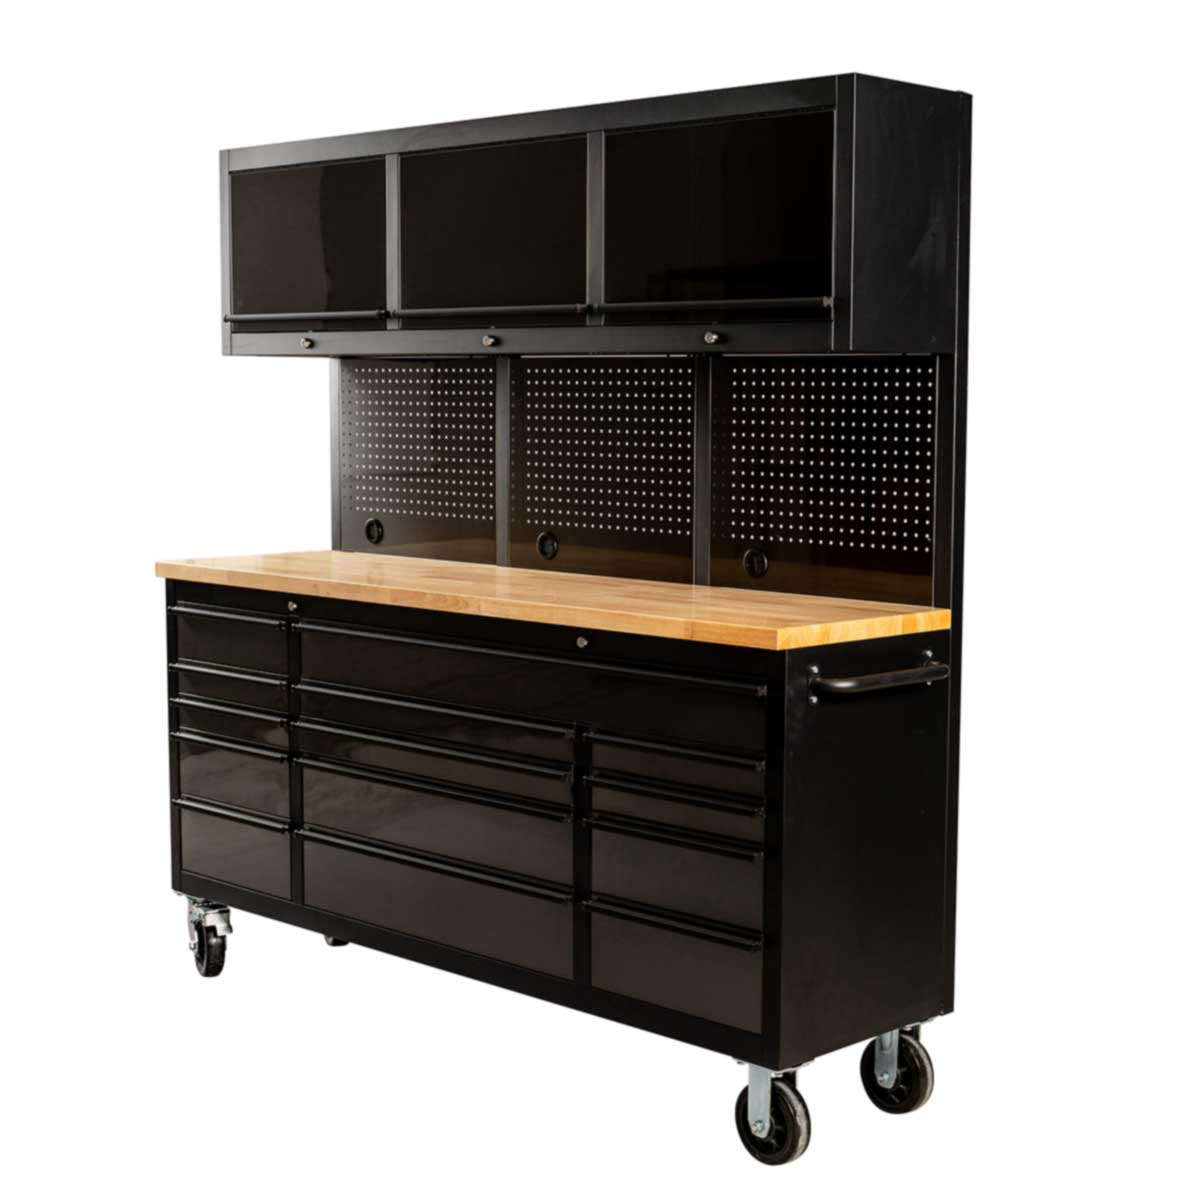 1.8M Black Tinted Stainless Steel Workbench Upper Cabinet Combo